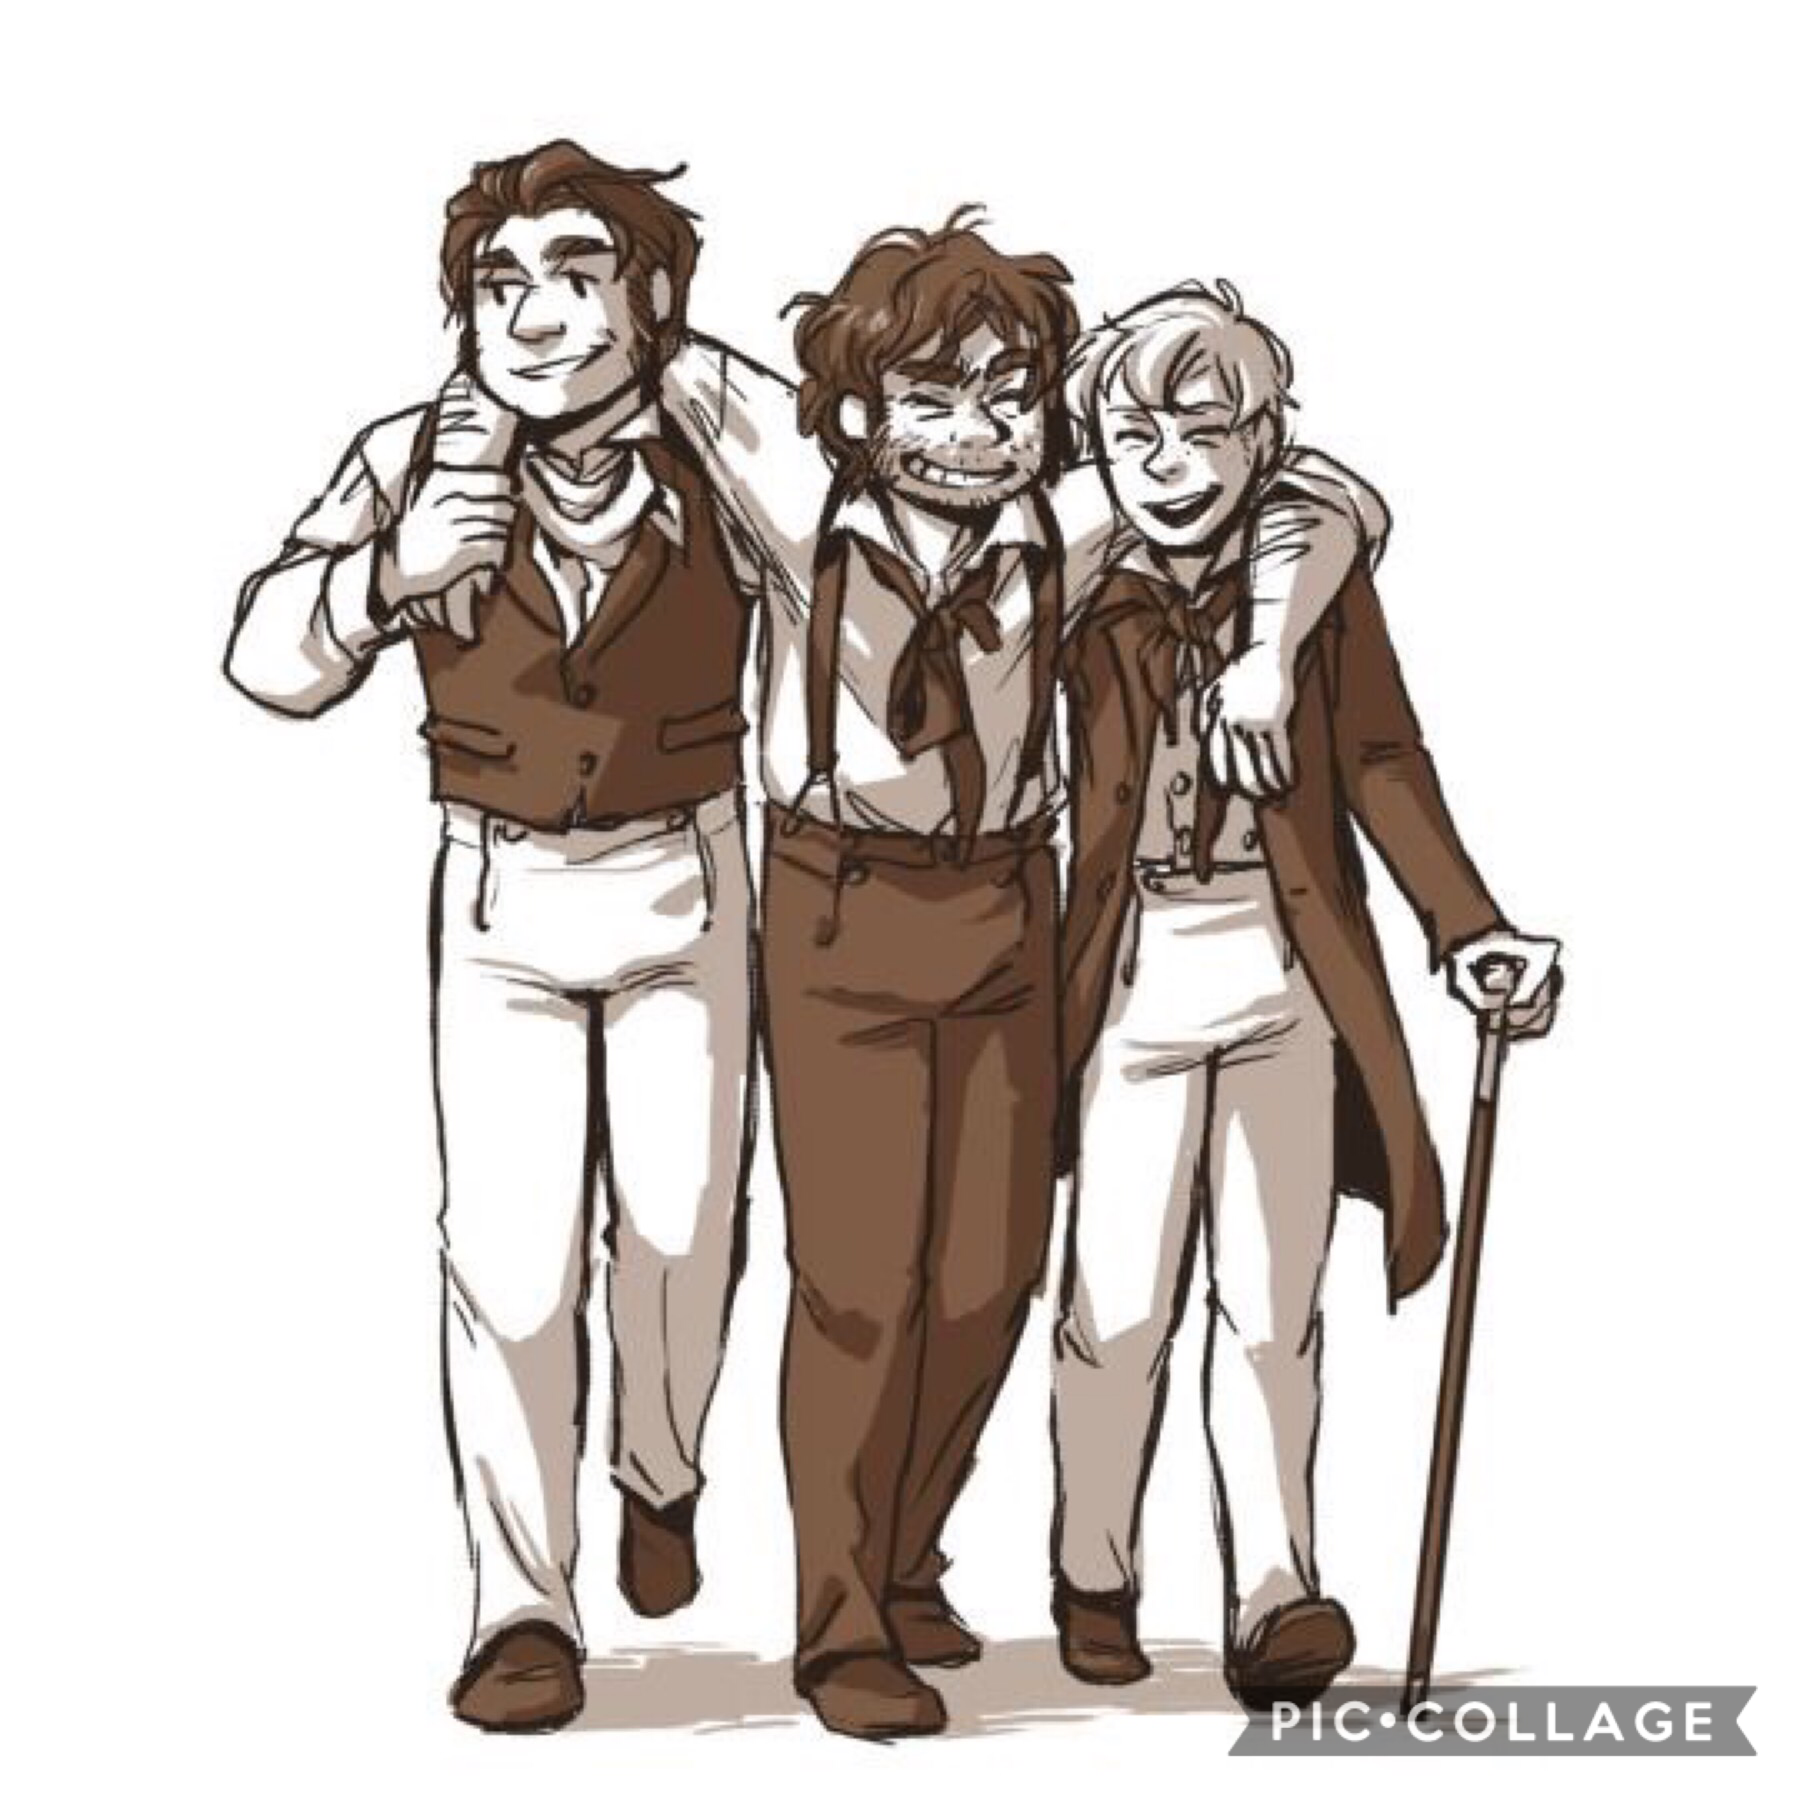 look at my boys :,))) i love my french boys 

(from left to right: bahorel, grantaire, and joly)